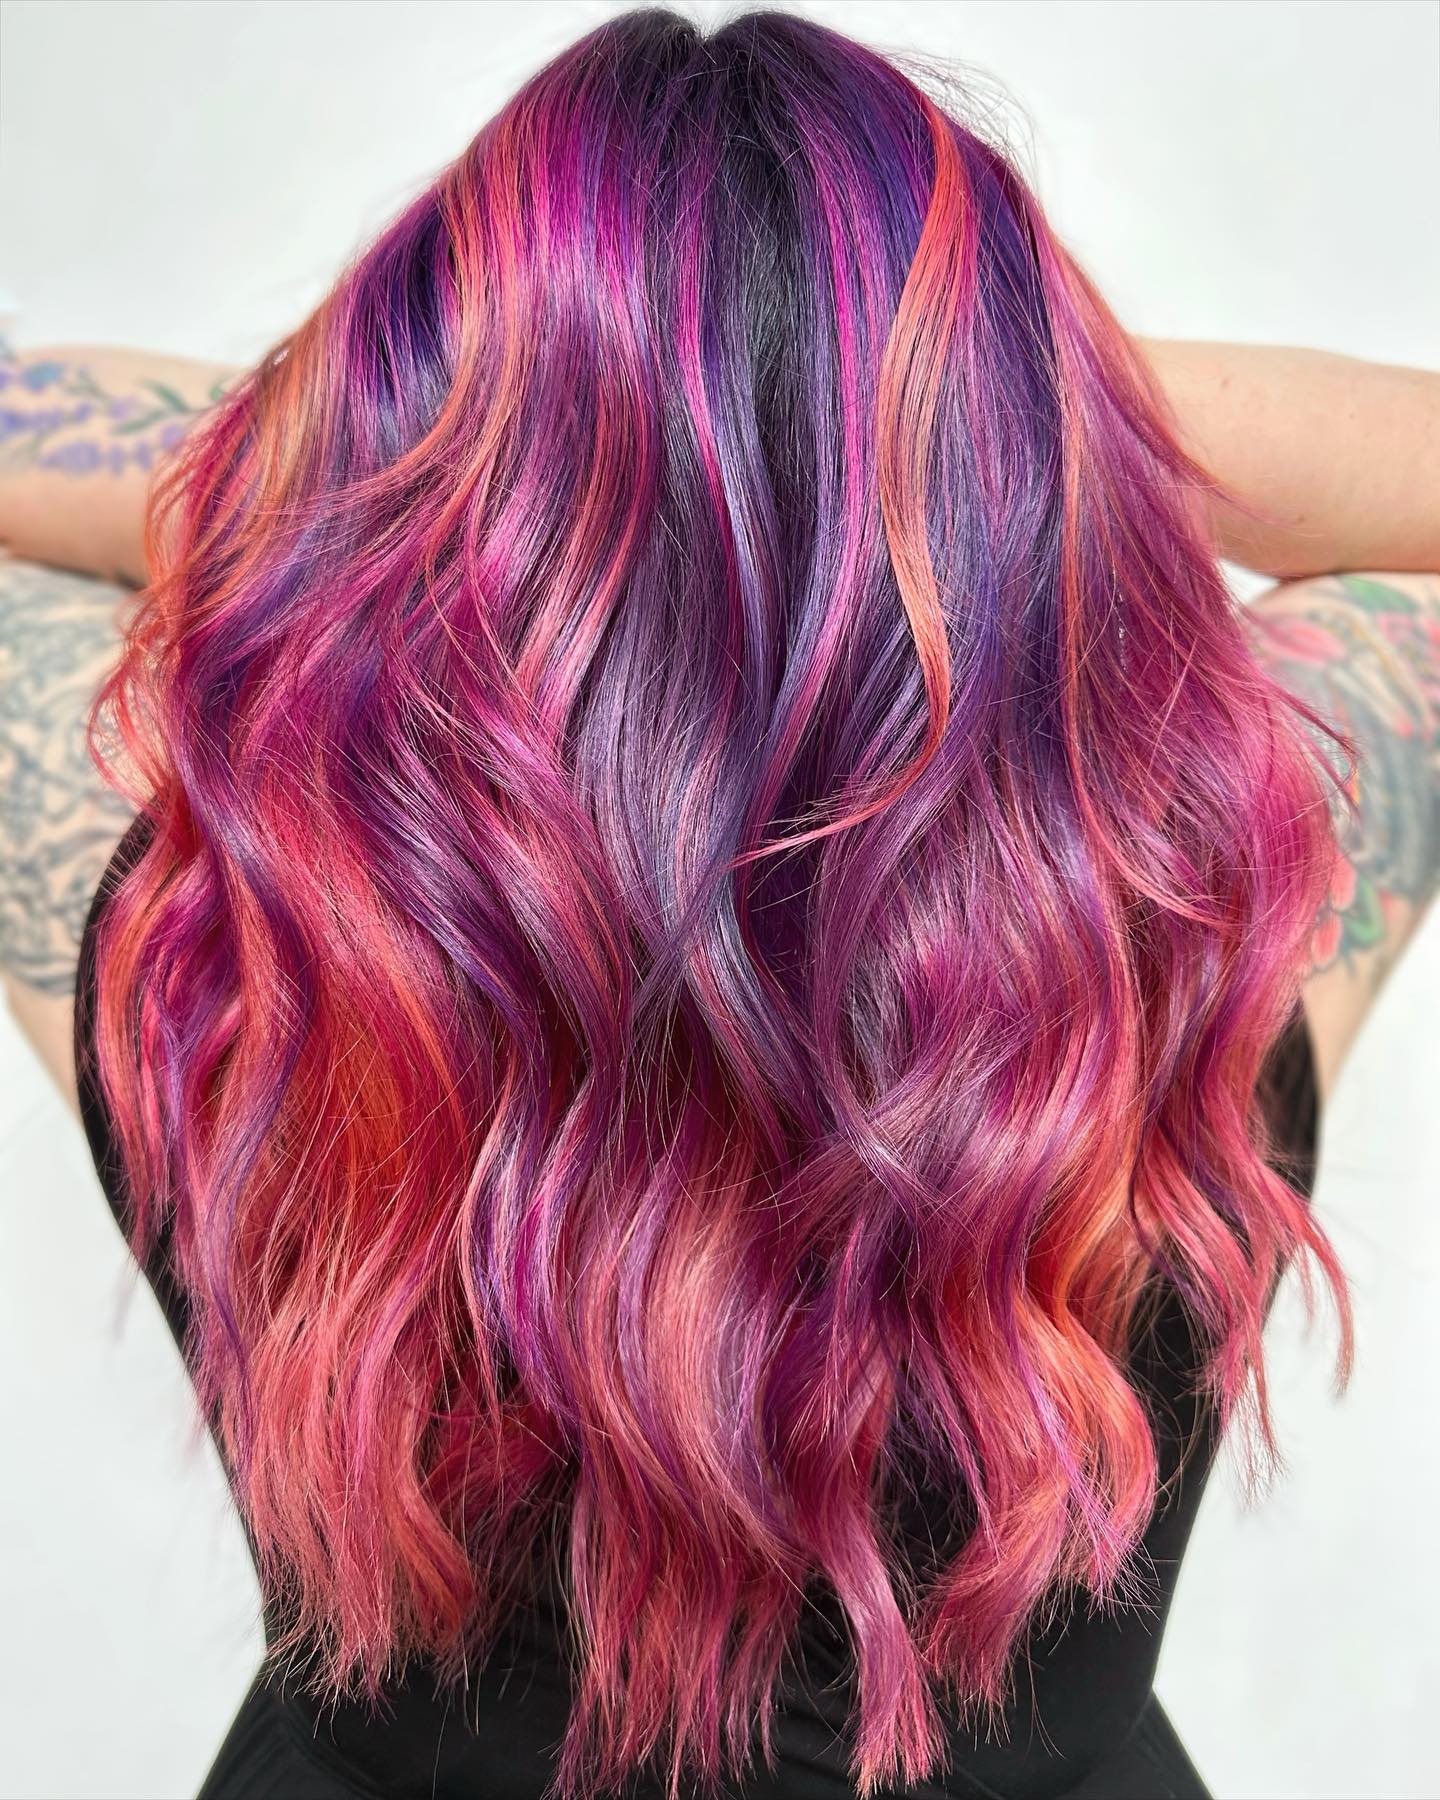 100+ Best Colorful Hair Ideas images 38